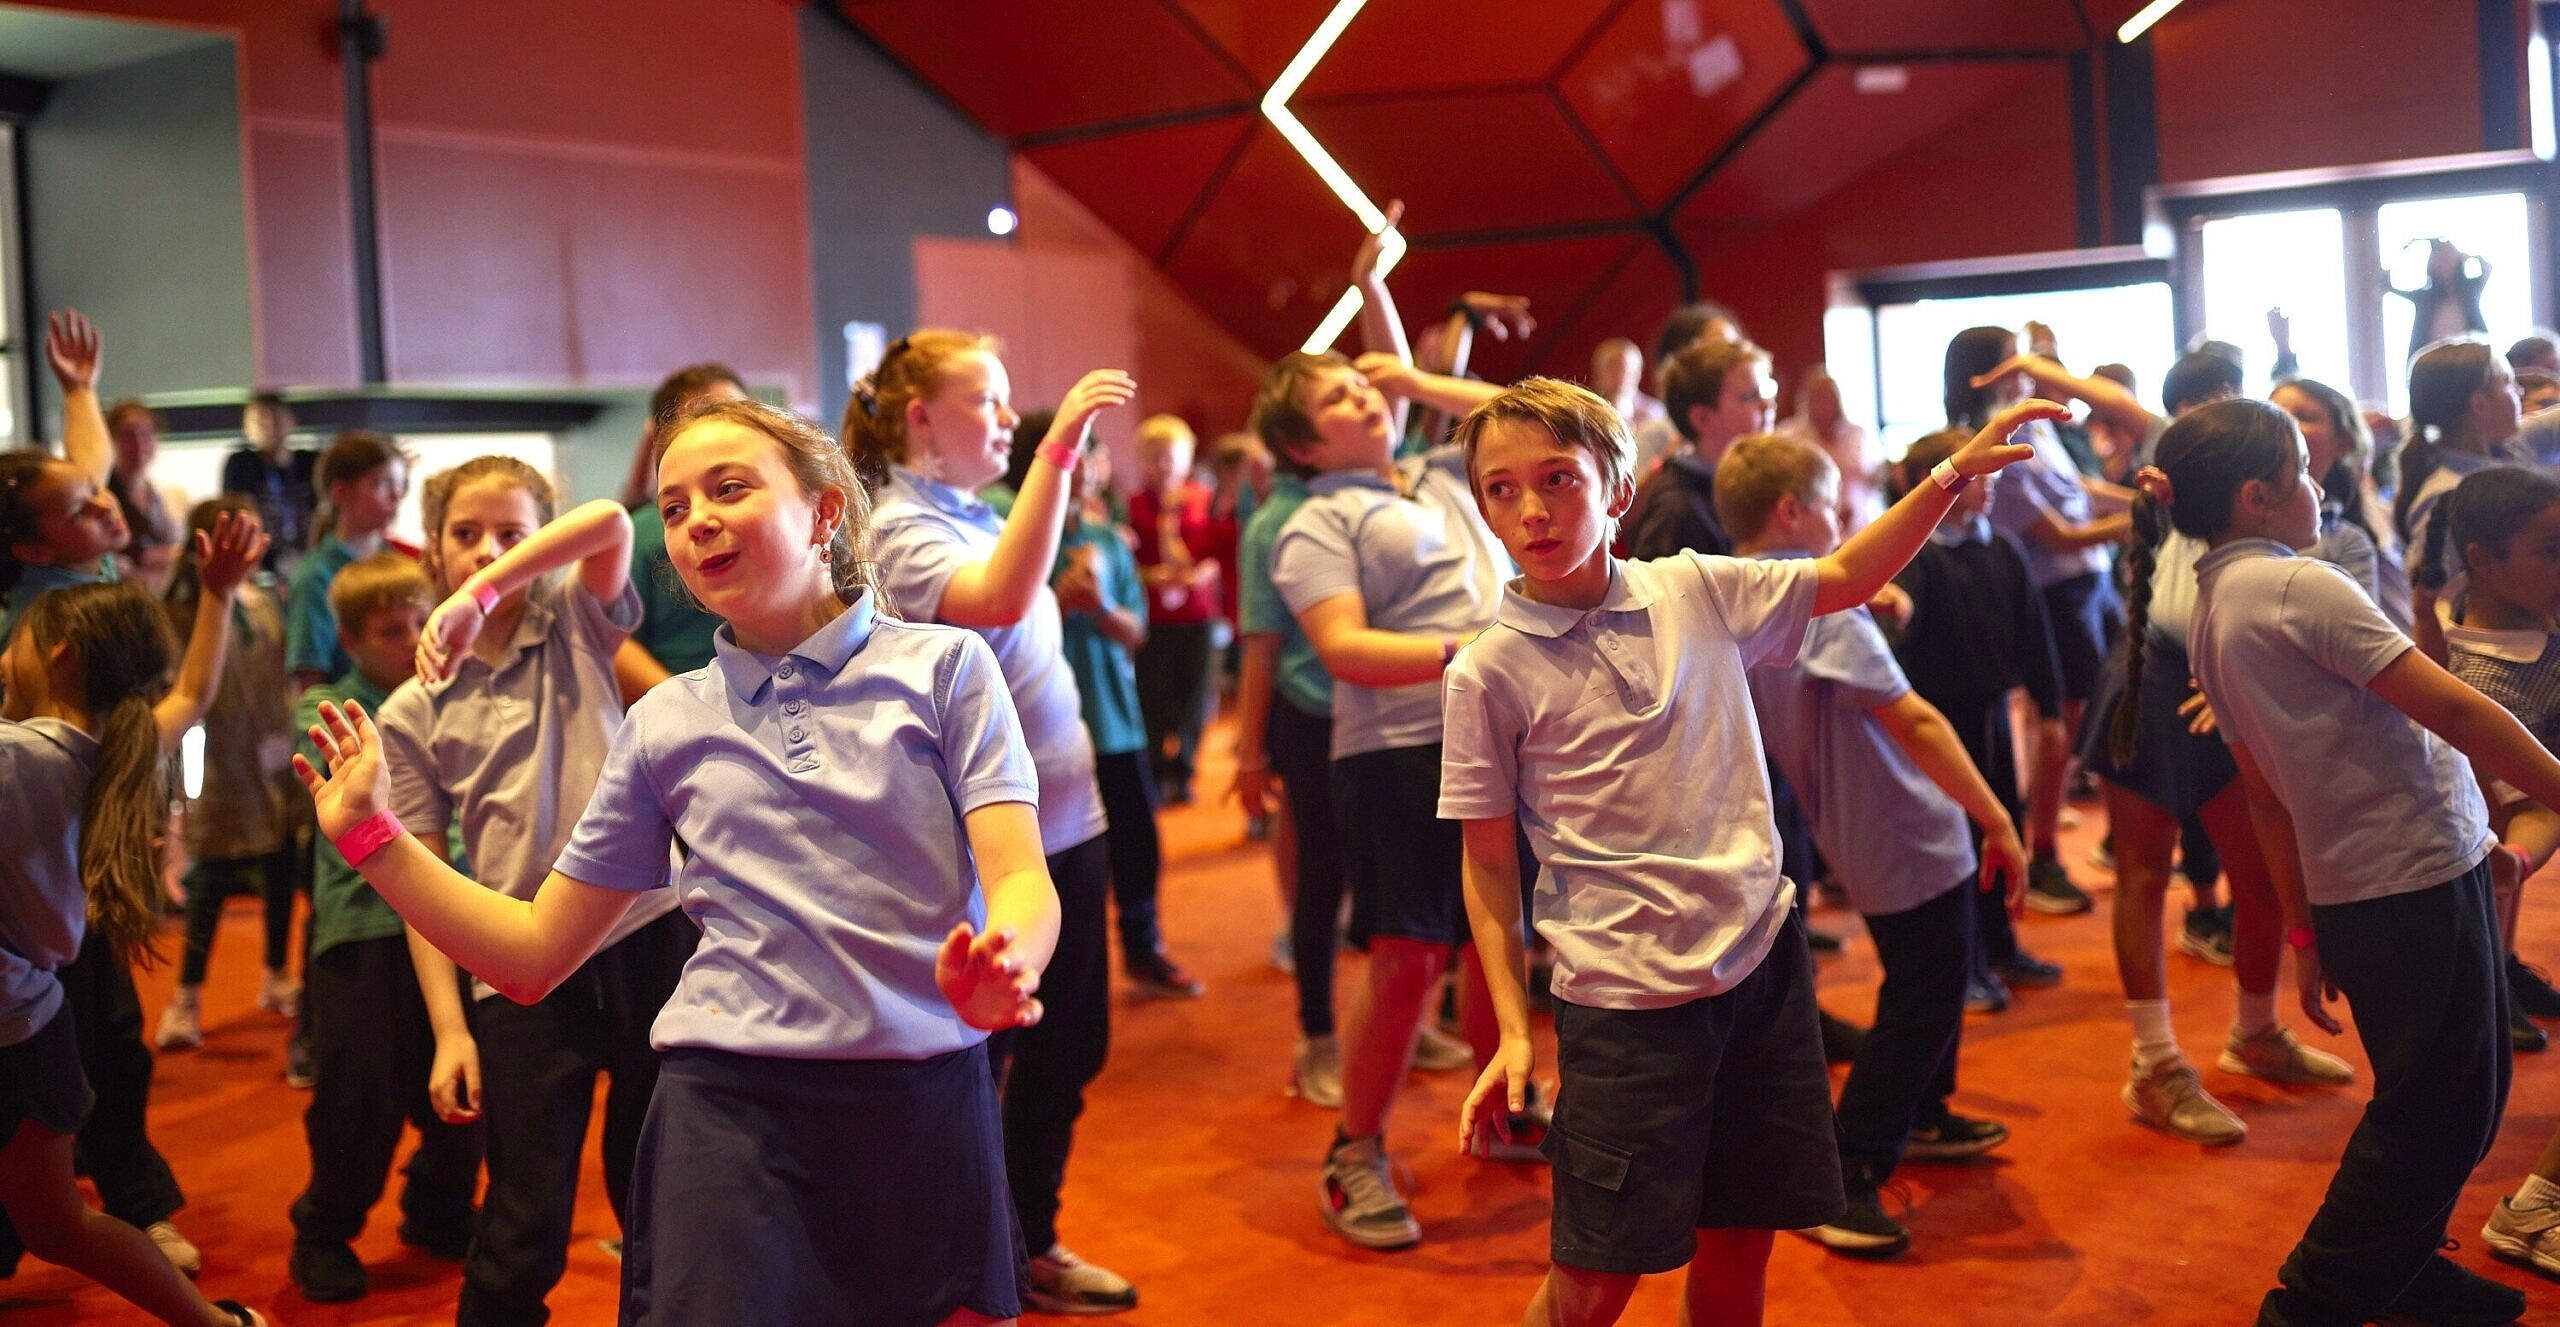 Students dancing in a arts learning workshop